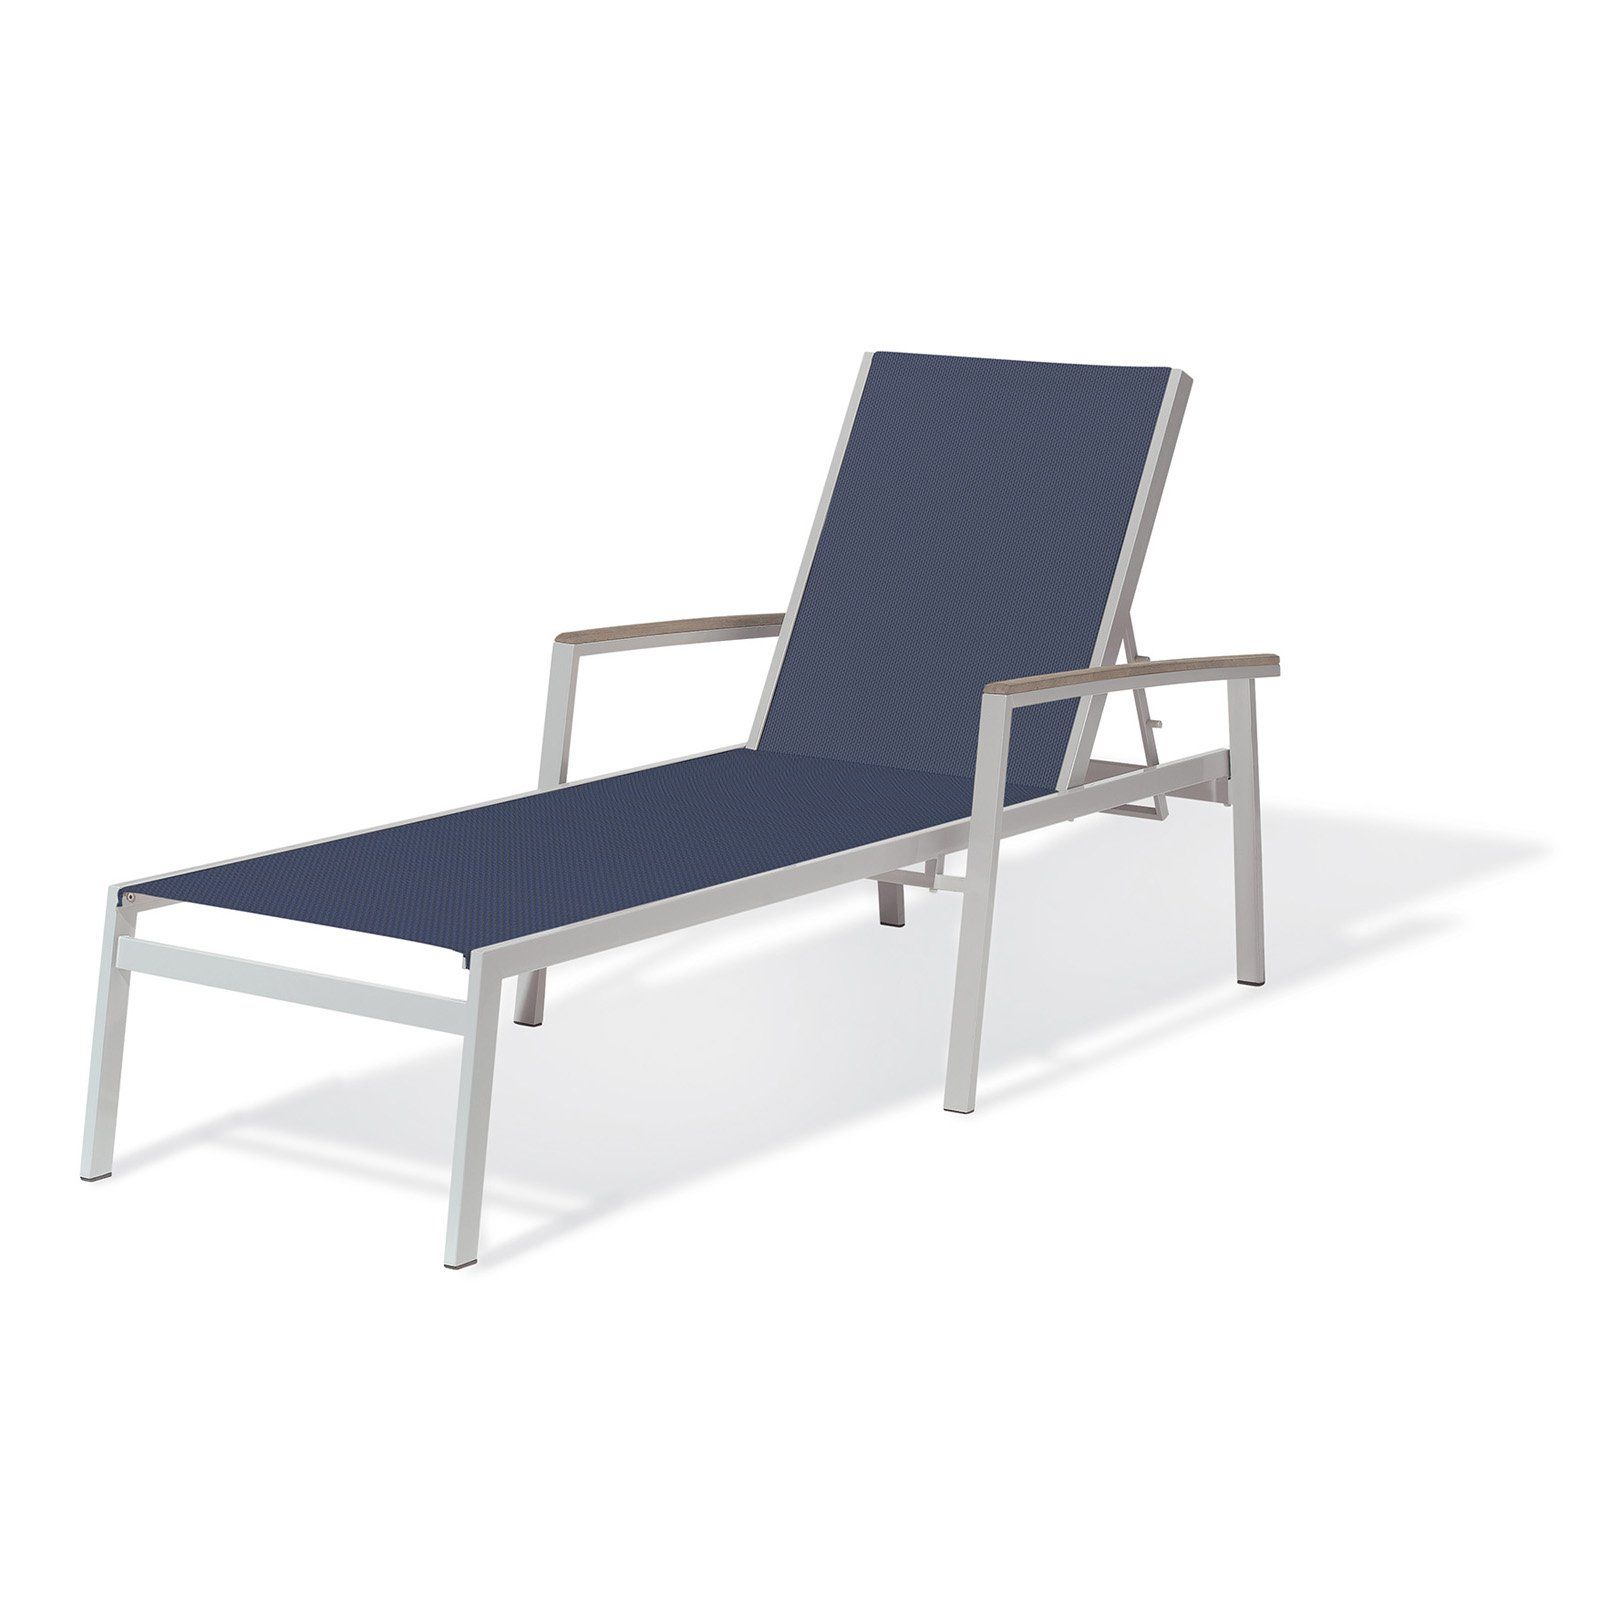 Outdoor Elisson Isle Elmwood Patio Chaise Lounge Set Ink Pen Intended For Most Up To Date Havenside Home Surfside Rutkoske Outdoor Wood Chaise Lounges (View 7 of 25)